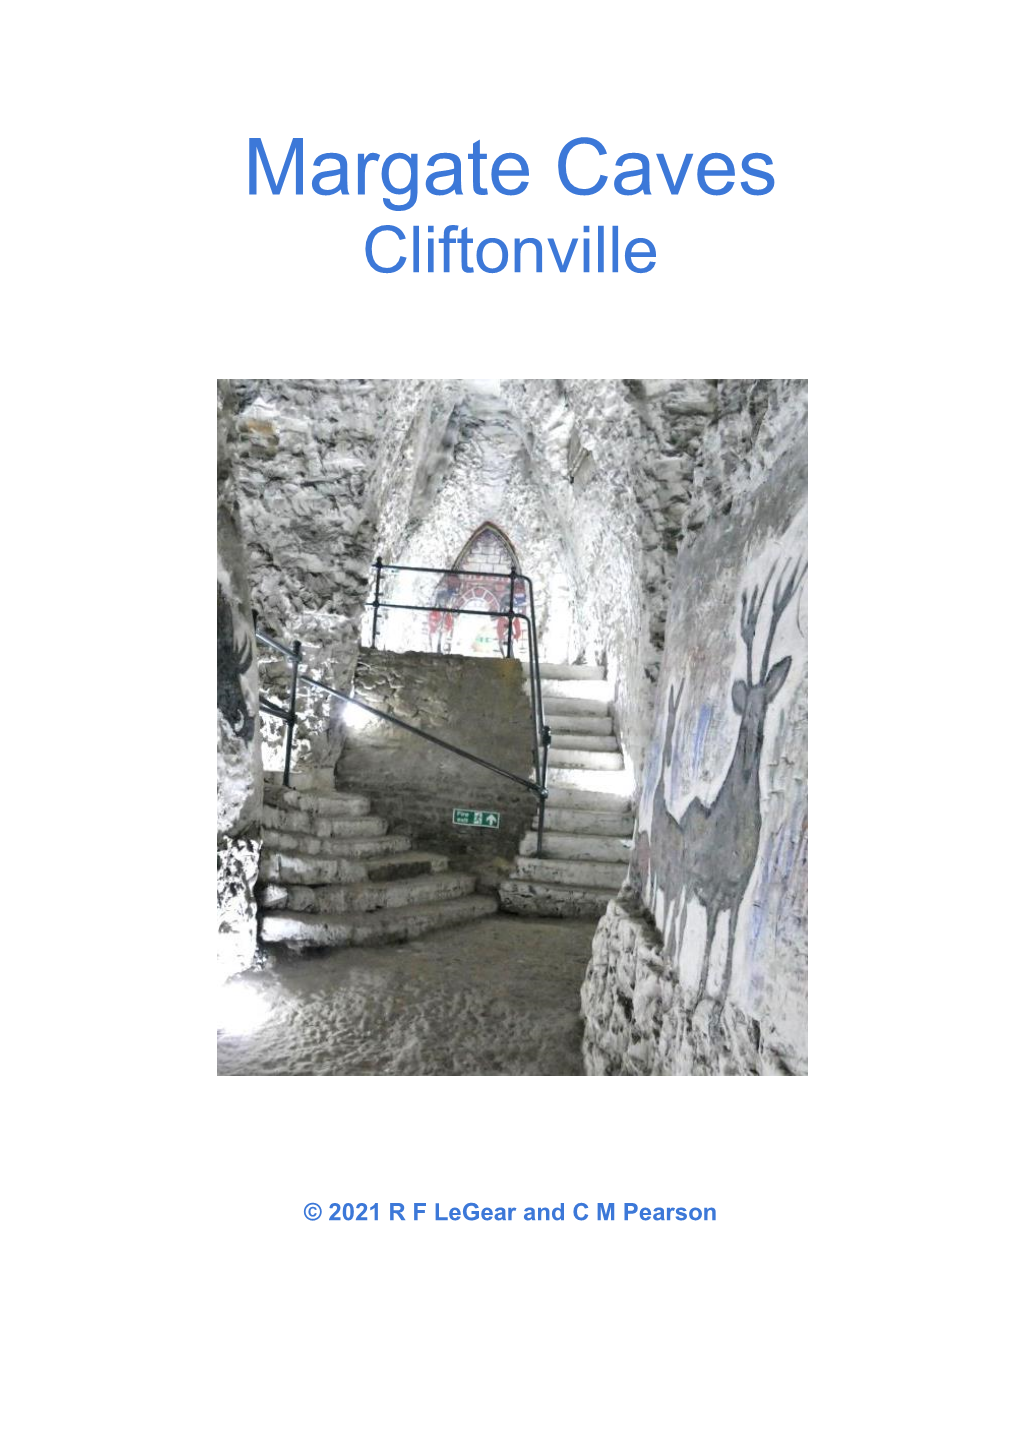 Margate Caves Cliftonville